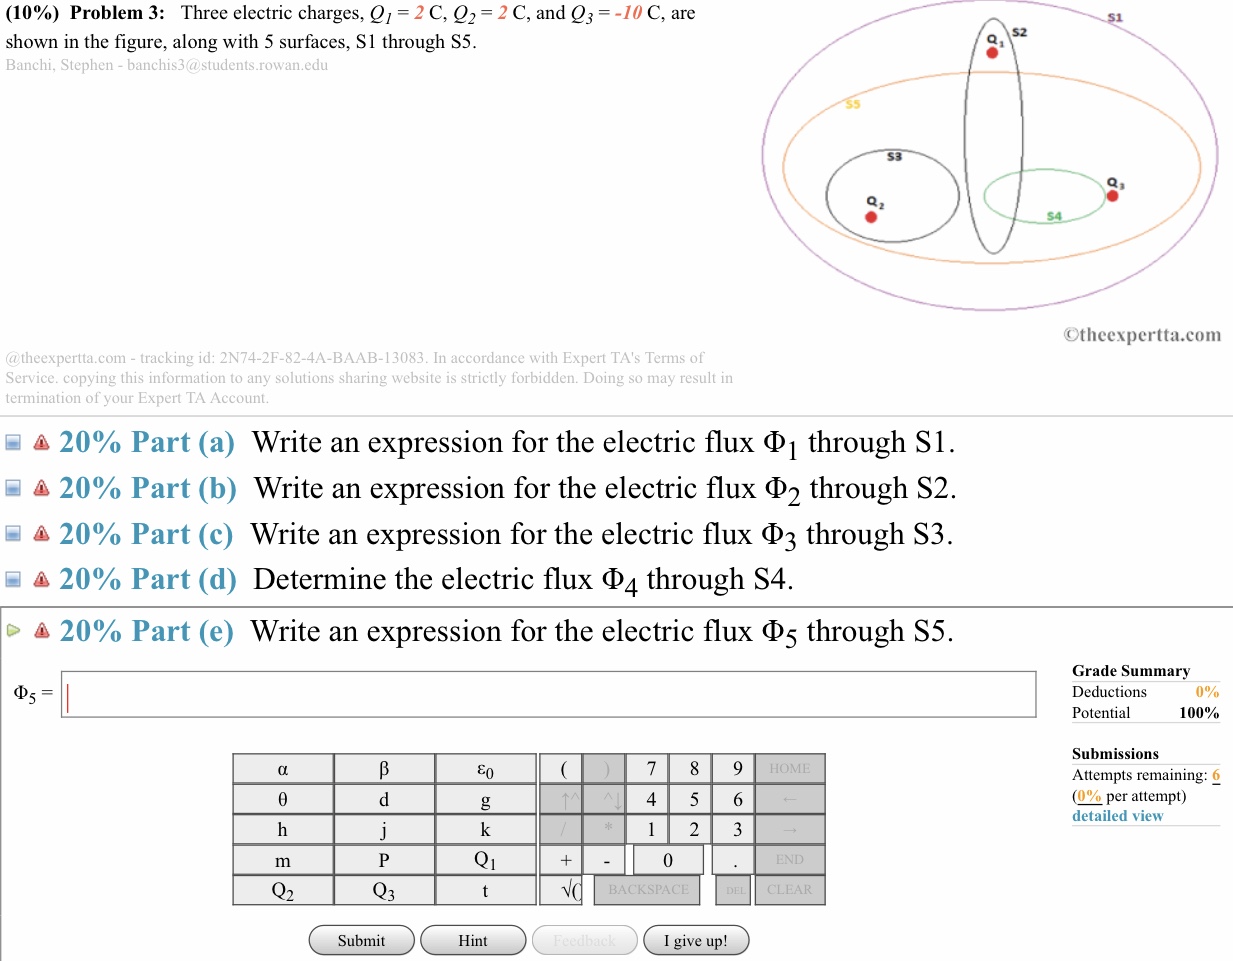 (10%) Problem 3: Three electric charges, Q1-2 C, Q2-2 C, and Q,--10 C, are
shown in the figure, along with 5 surfaces, S1 through S5.
Banchi, Stephen- banchis3@students.rowan.edu
S2
53
Otheexpertta.com
@ theexpertta.com - tracking id: 2N74-2F-82-4A-BAAB-13083. In accordance with Expert TA's Terms of
Service. copying this information to any solutions sharing website is strictly forbidden. Doing so may result in
termination of your Expert TA Account
-là 20% Part (a) Write an expression for the electric flux Φ 1 through SI
Δ 20% Part (b) Write an expression for the electric flux through S2.
20% Part (c) Write an expression for the electric flux ФЗ through S3
20% Part (d) Determine the electric flux Φ4 through S4.
20% Part (e) Write an expression for the electric flux Φ5 through S5
Grade Summary
Deductions
Potential
0%
100%
Submissions
Attempts remaining: 6
(0%0 per attempt)
detailed view
IOMI
4 5 6
Q1
BACKSPACE
CLEAR
Submit
Hint
I give up!
